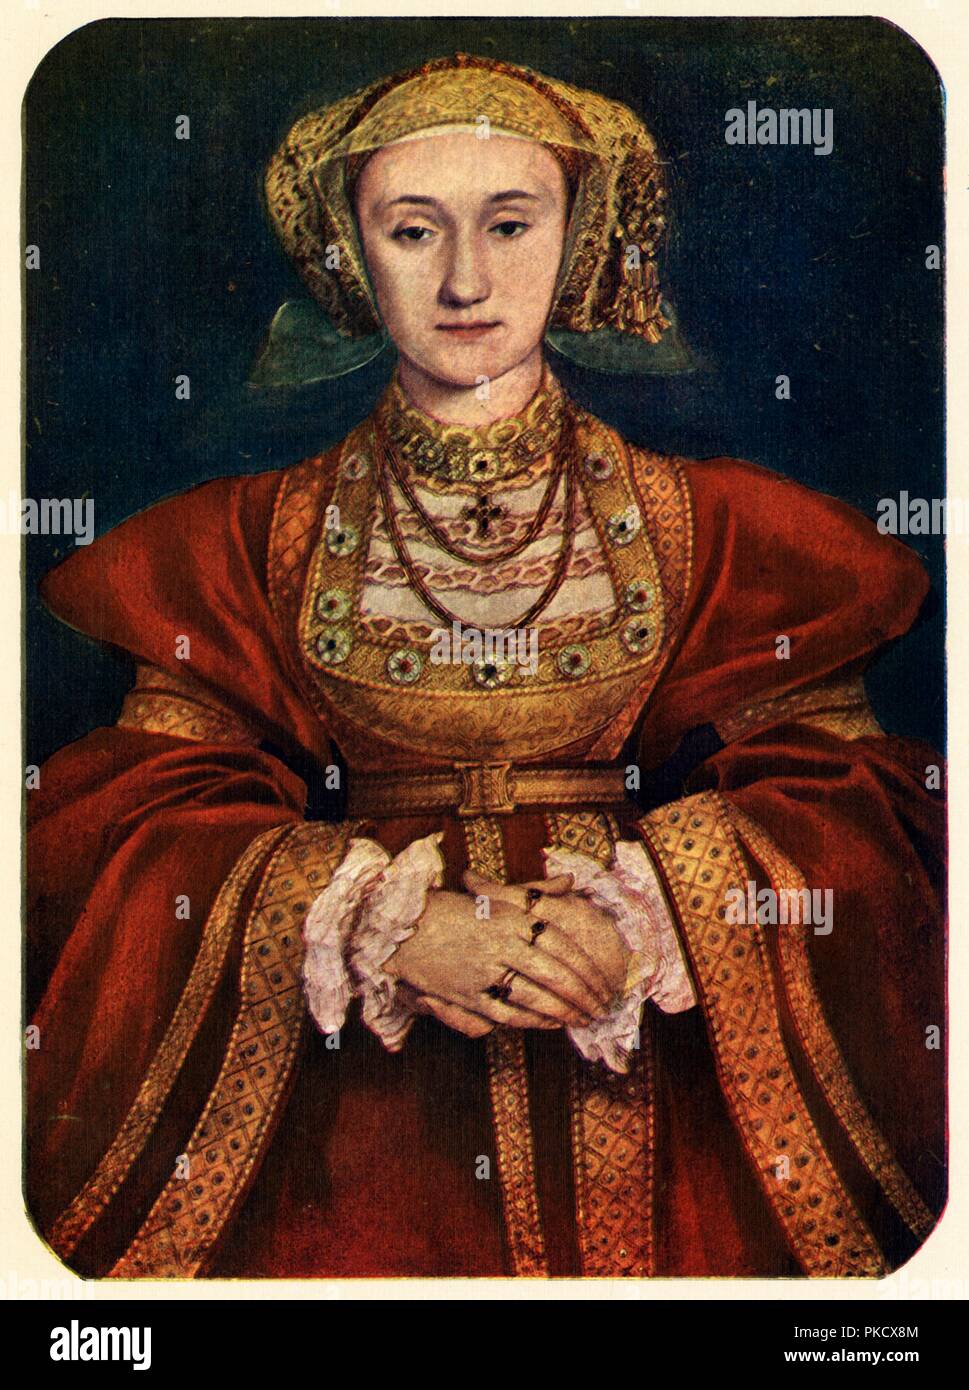 "Anne of Cleves', 1539, (1909). Artista: Hans Holbein il Giovane. Foto Stock